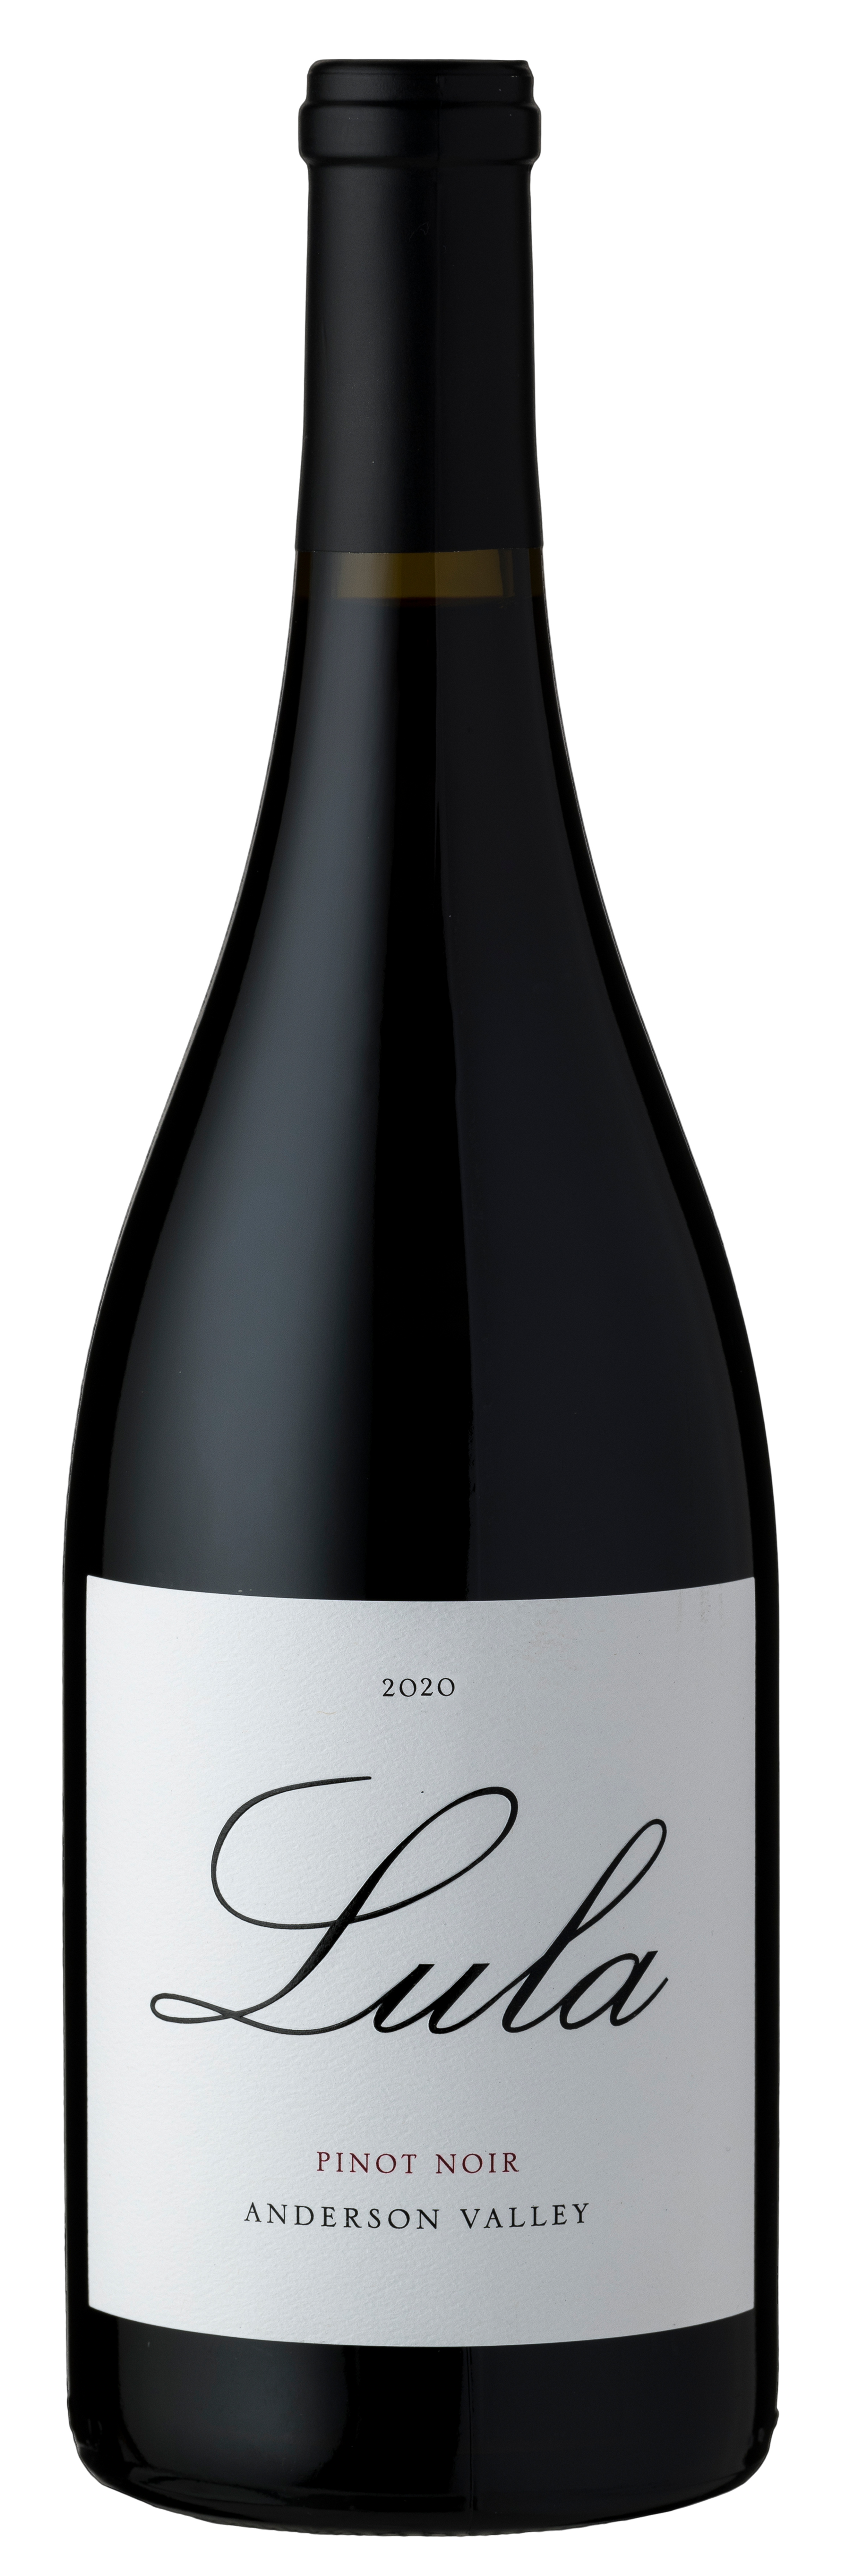 Product Image for 2020 Anderson Valley Pinot Noir